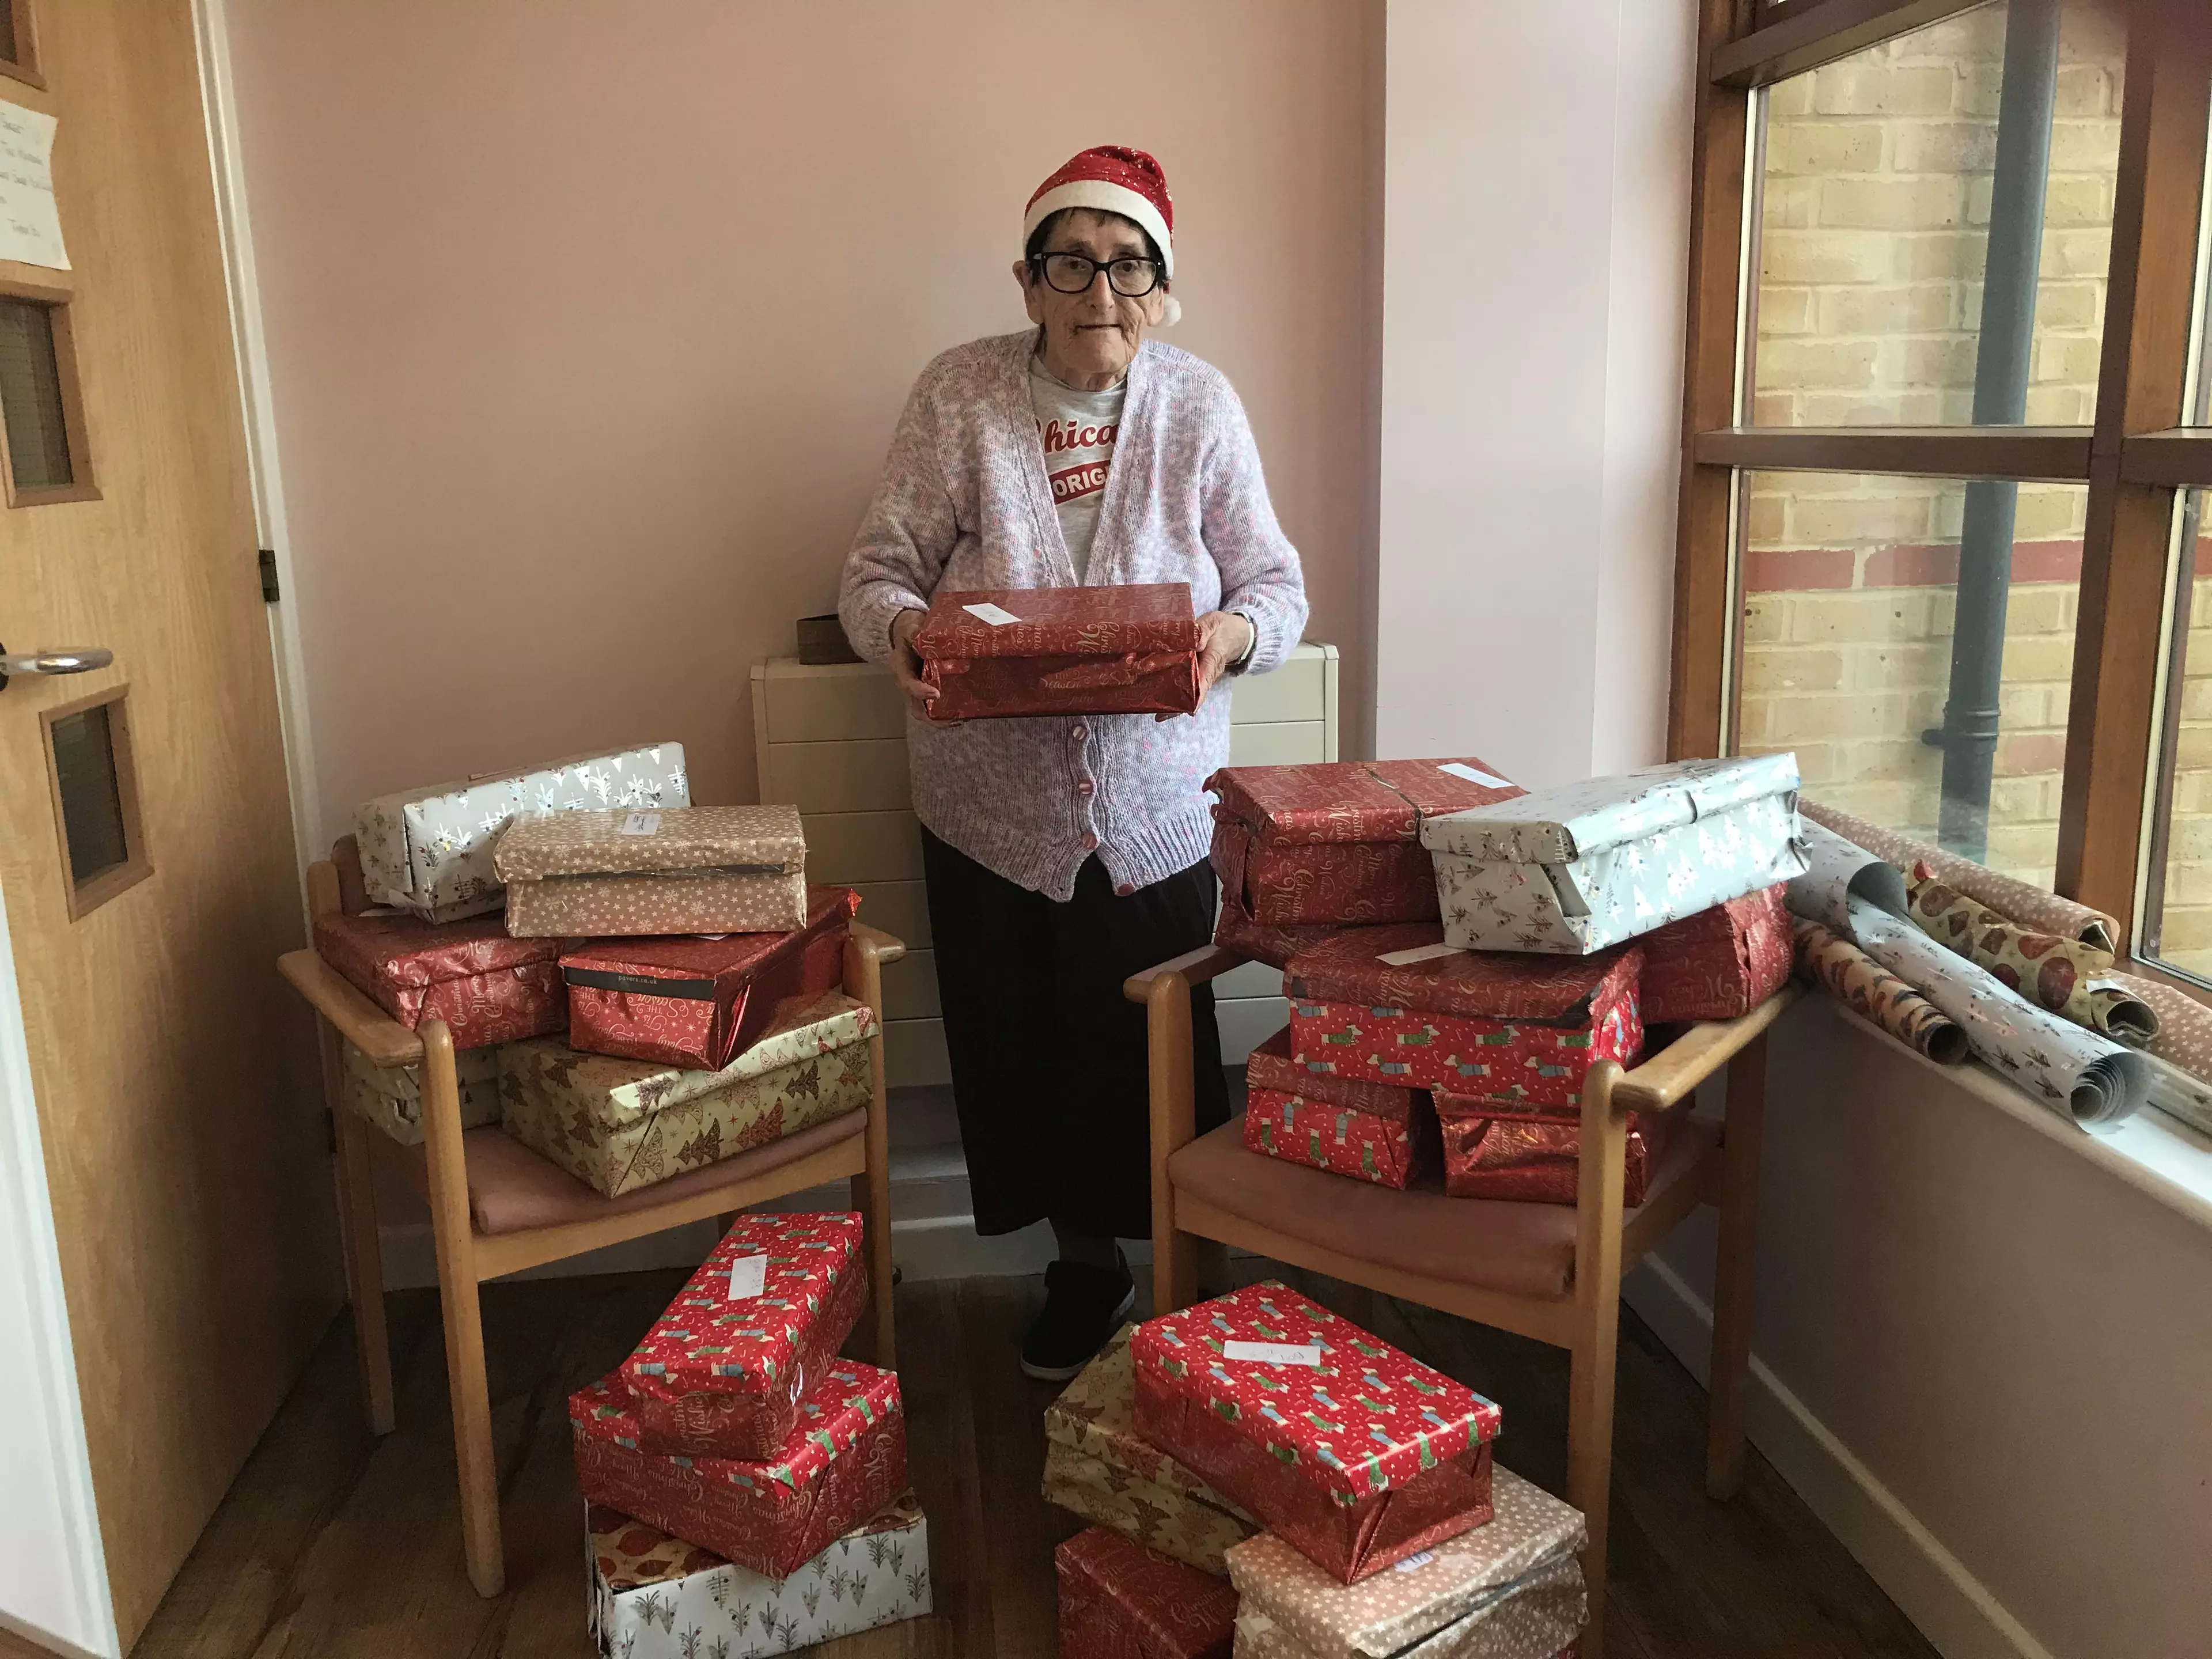 Fran has her own room in the care home to sort her boxes in.